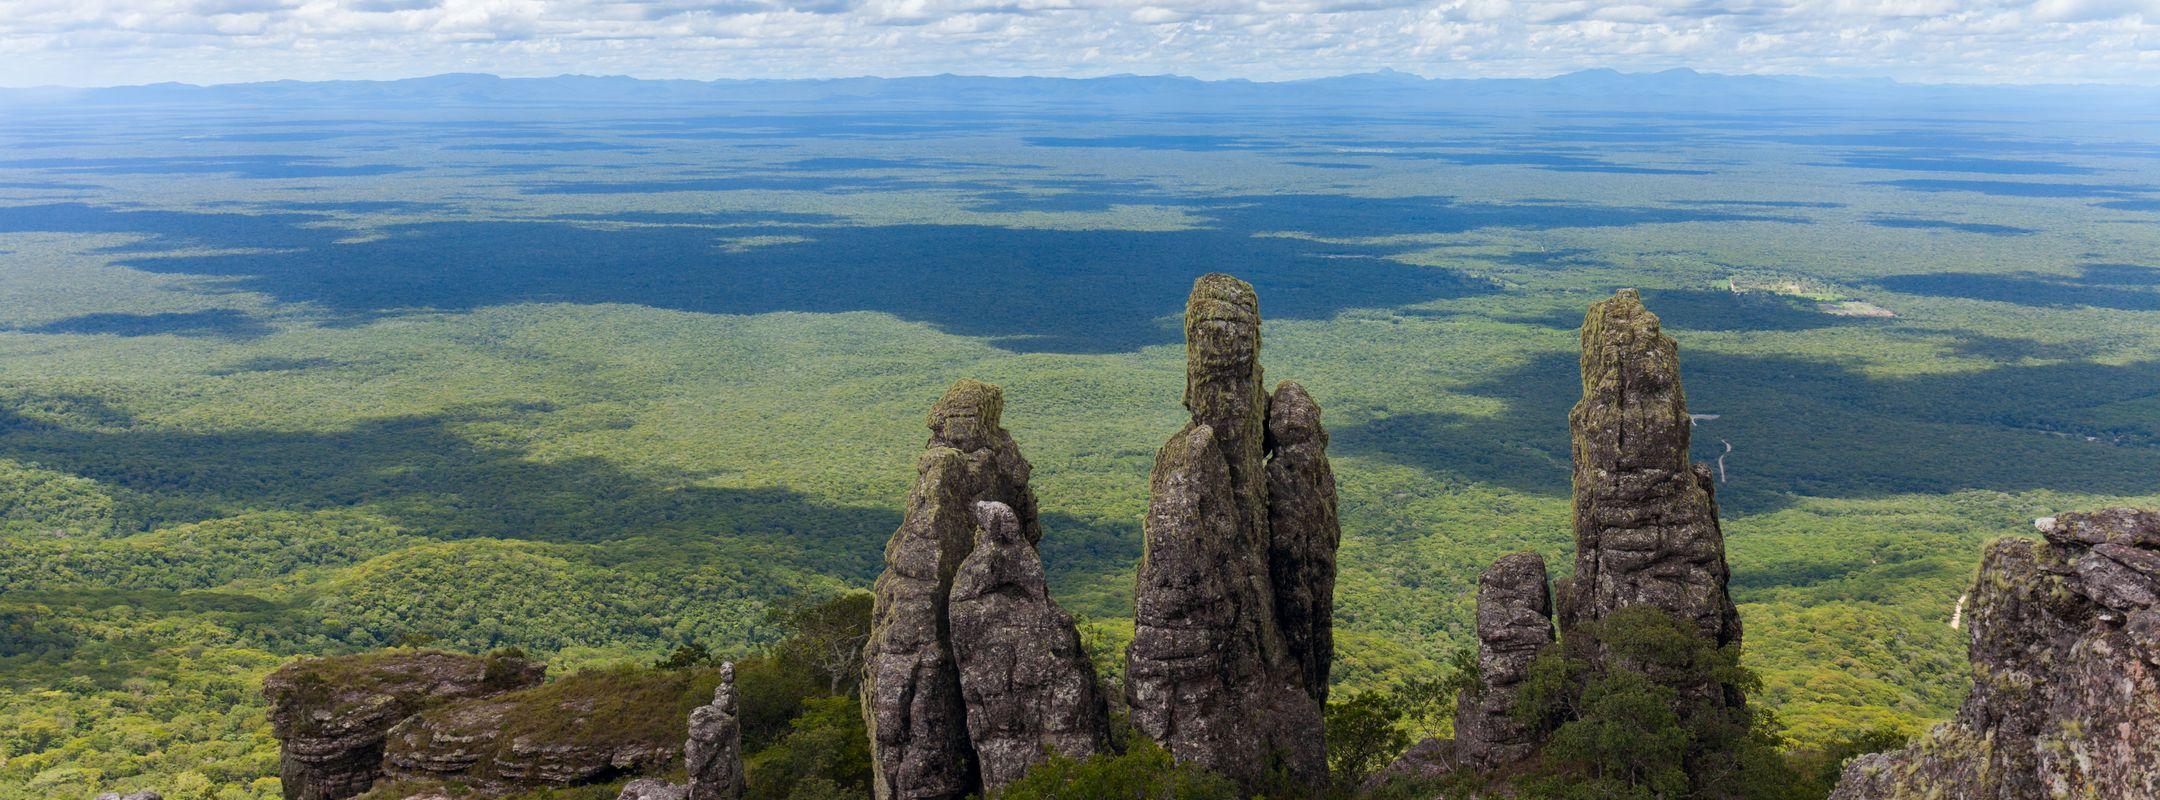 View of natural stone pillars in the Chiquitania region, Bolivia